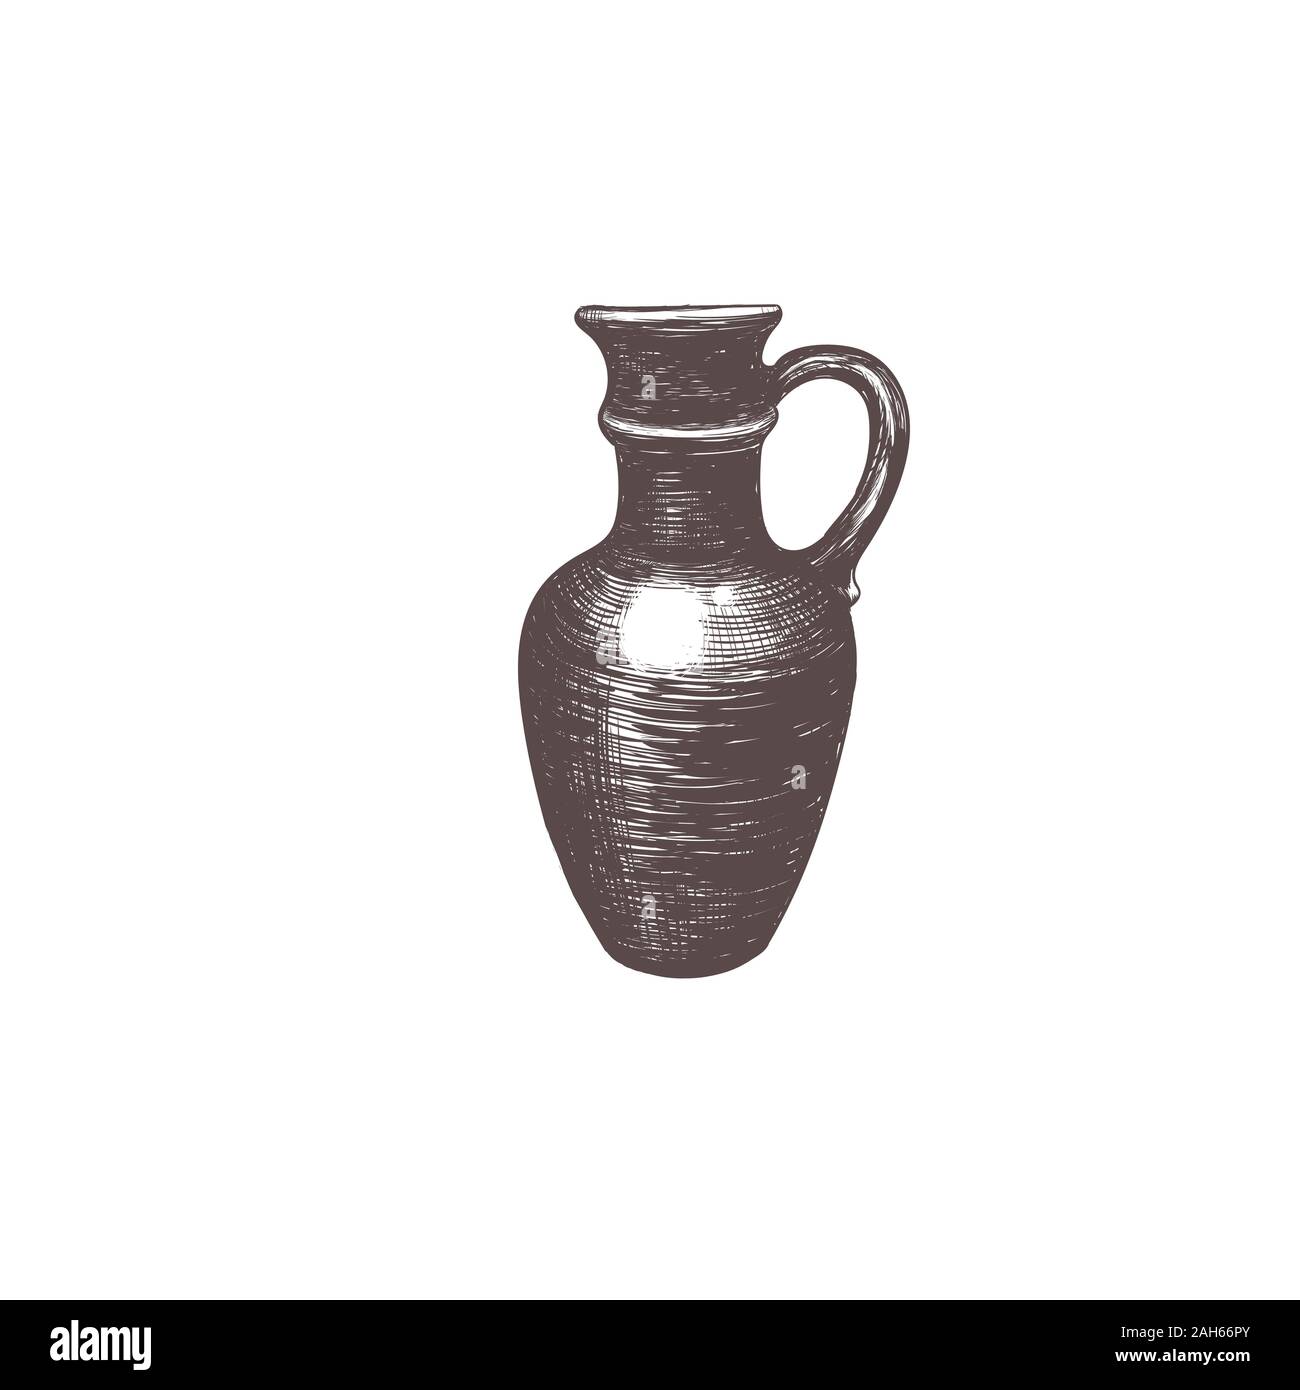 100,000 Silhouette of a jug Vector Images - Page 4 | Depositphotos